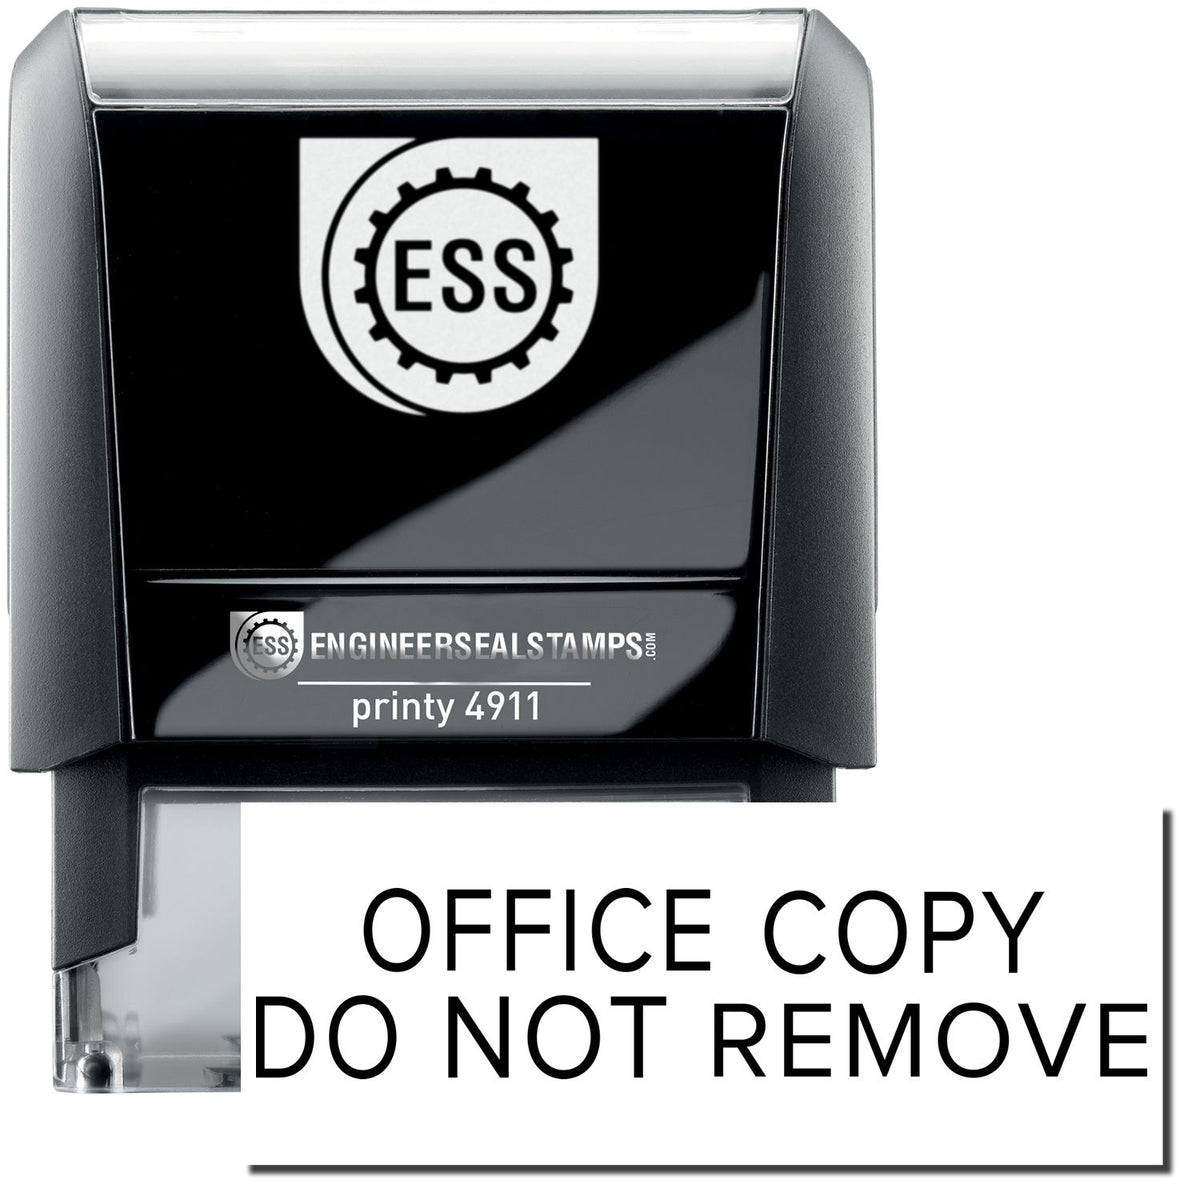 A self-inking stamp with a stamped image showing how the text &quot;OFFICE COPY DO NOT REMOVE&quot; in a narrow font is displayed after stamping.